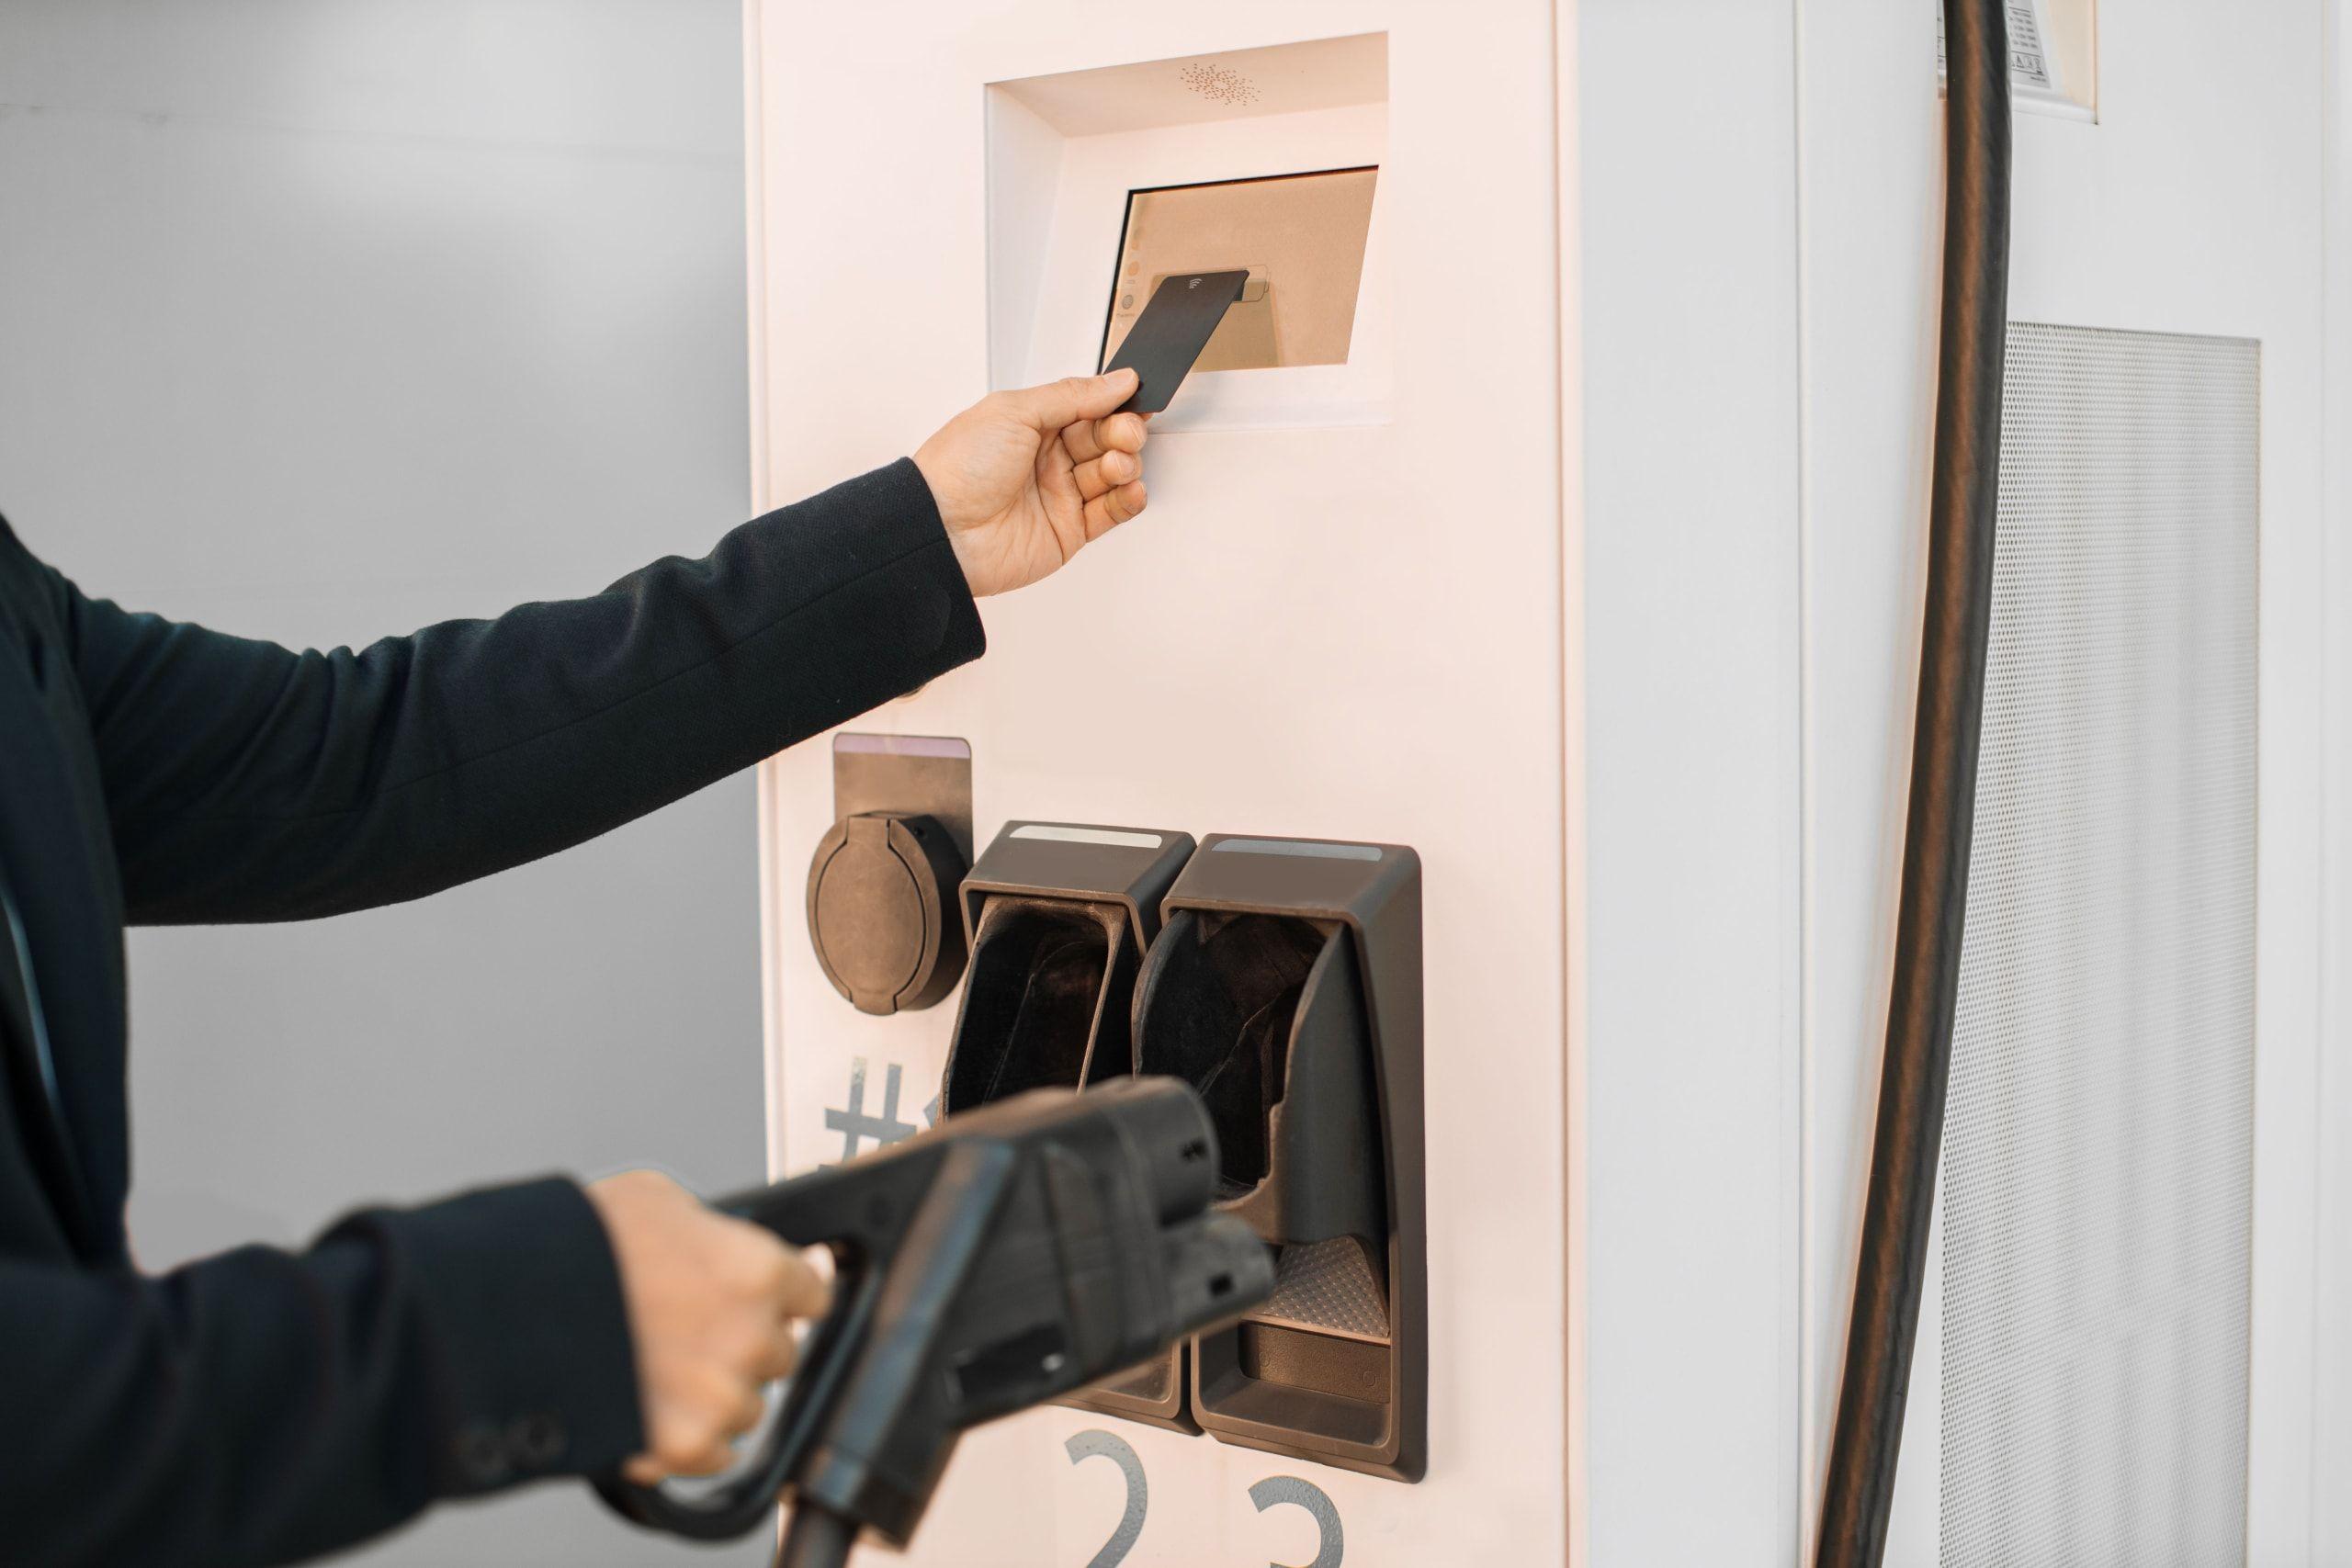 How do EV charge cards work